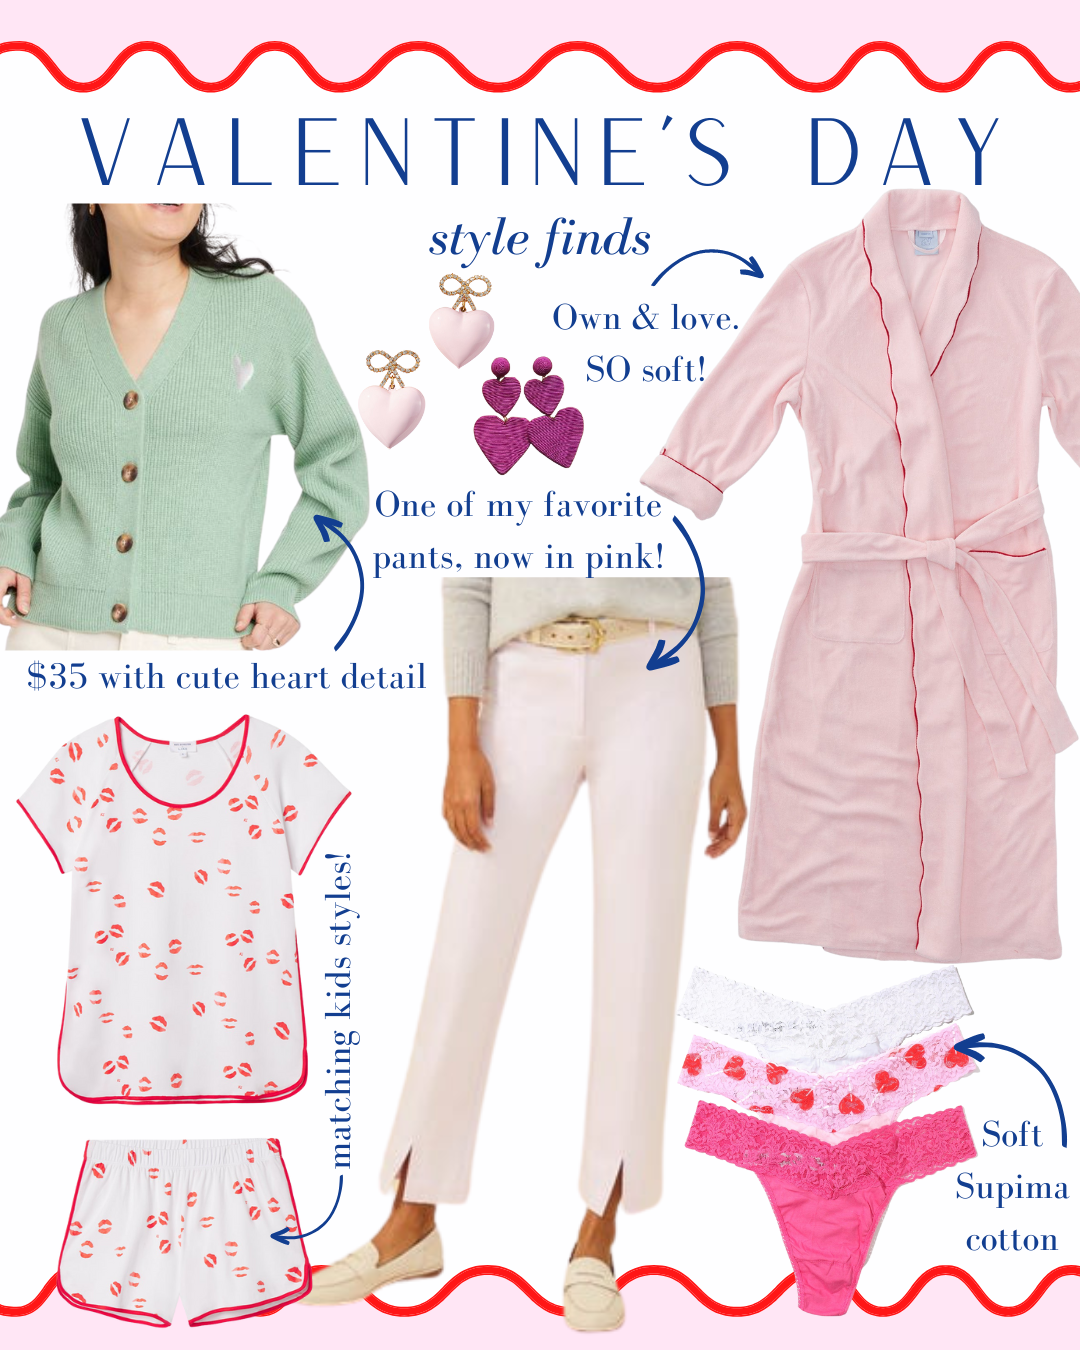 Valentine's Day gifts for her, Valentine's Day gifts for the family, Valentine's Day-themed clothing, Valentine's Day clothing for women, heart pajamas, Valentine's Day pjs for women, Valentine's Day sweater